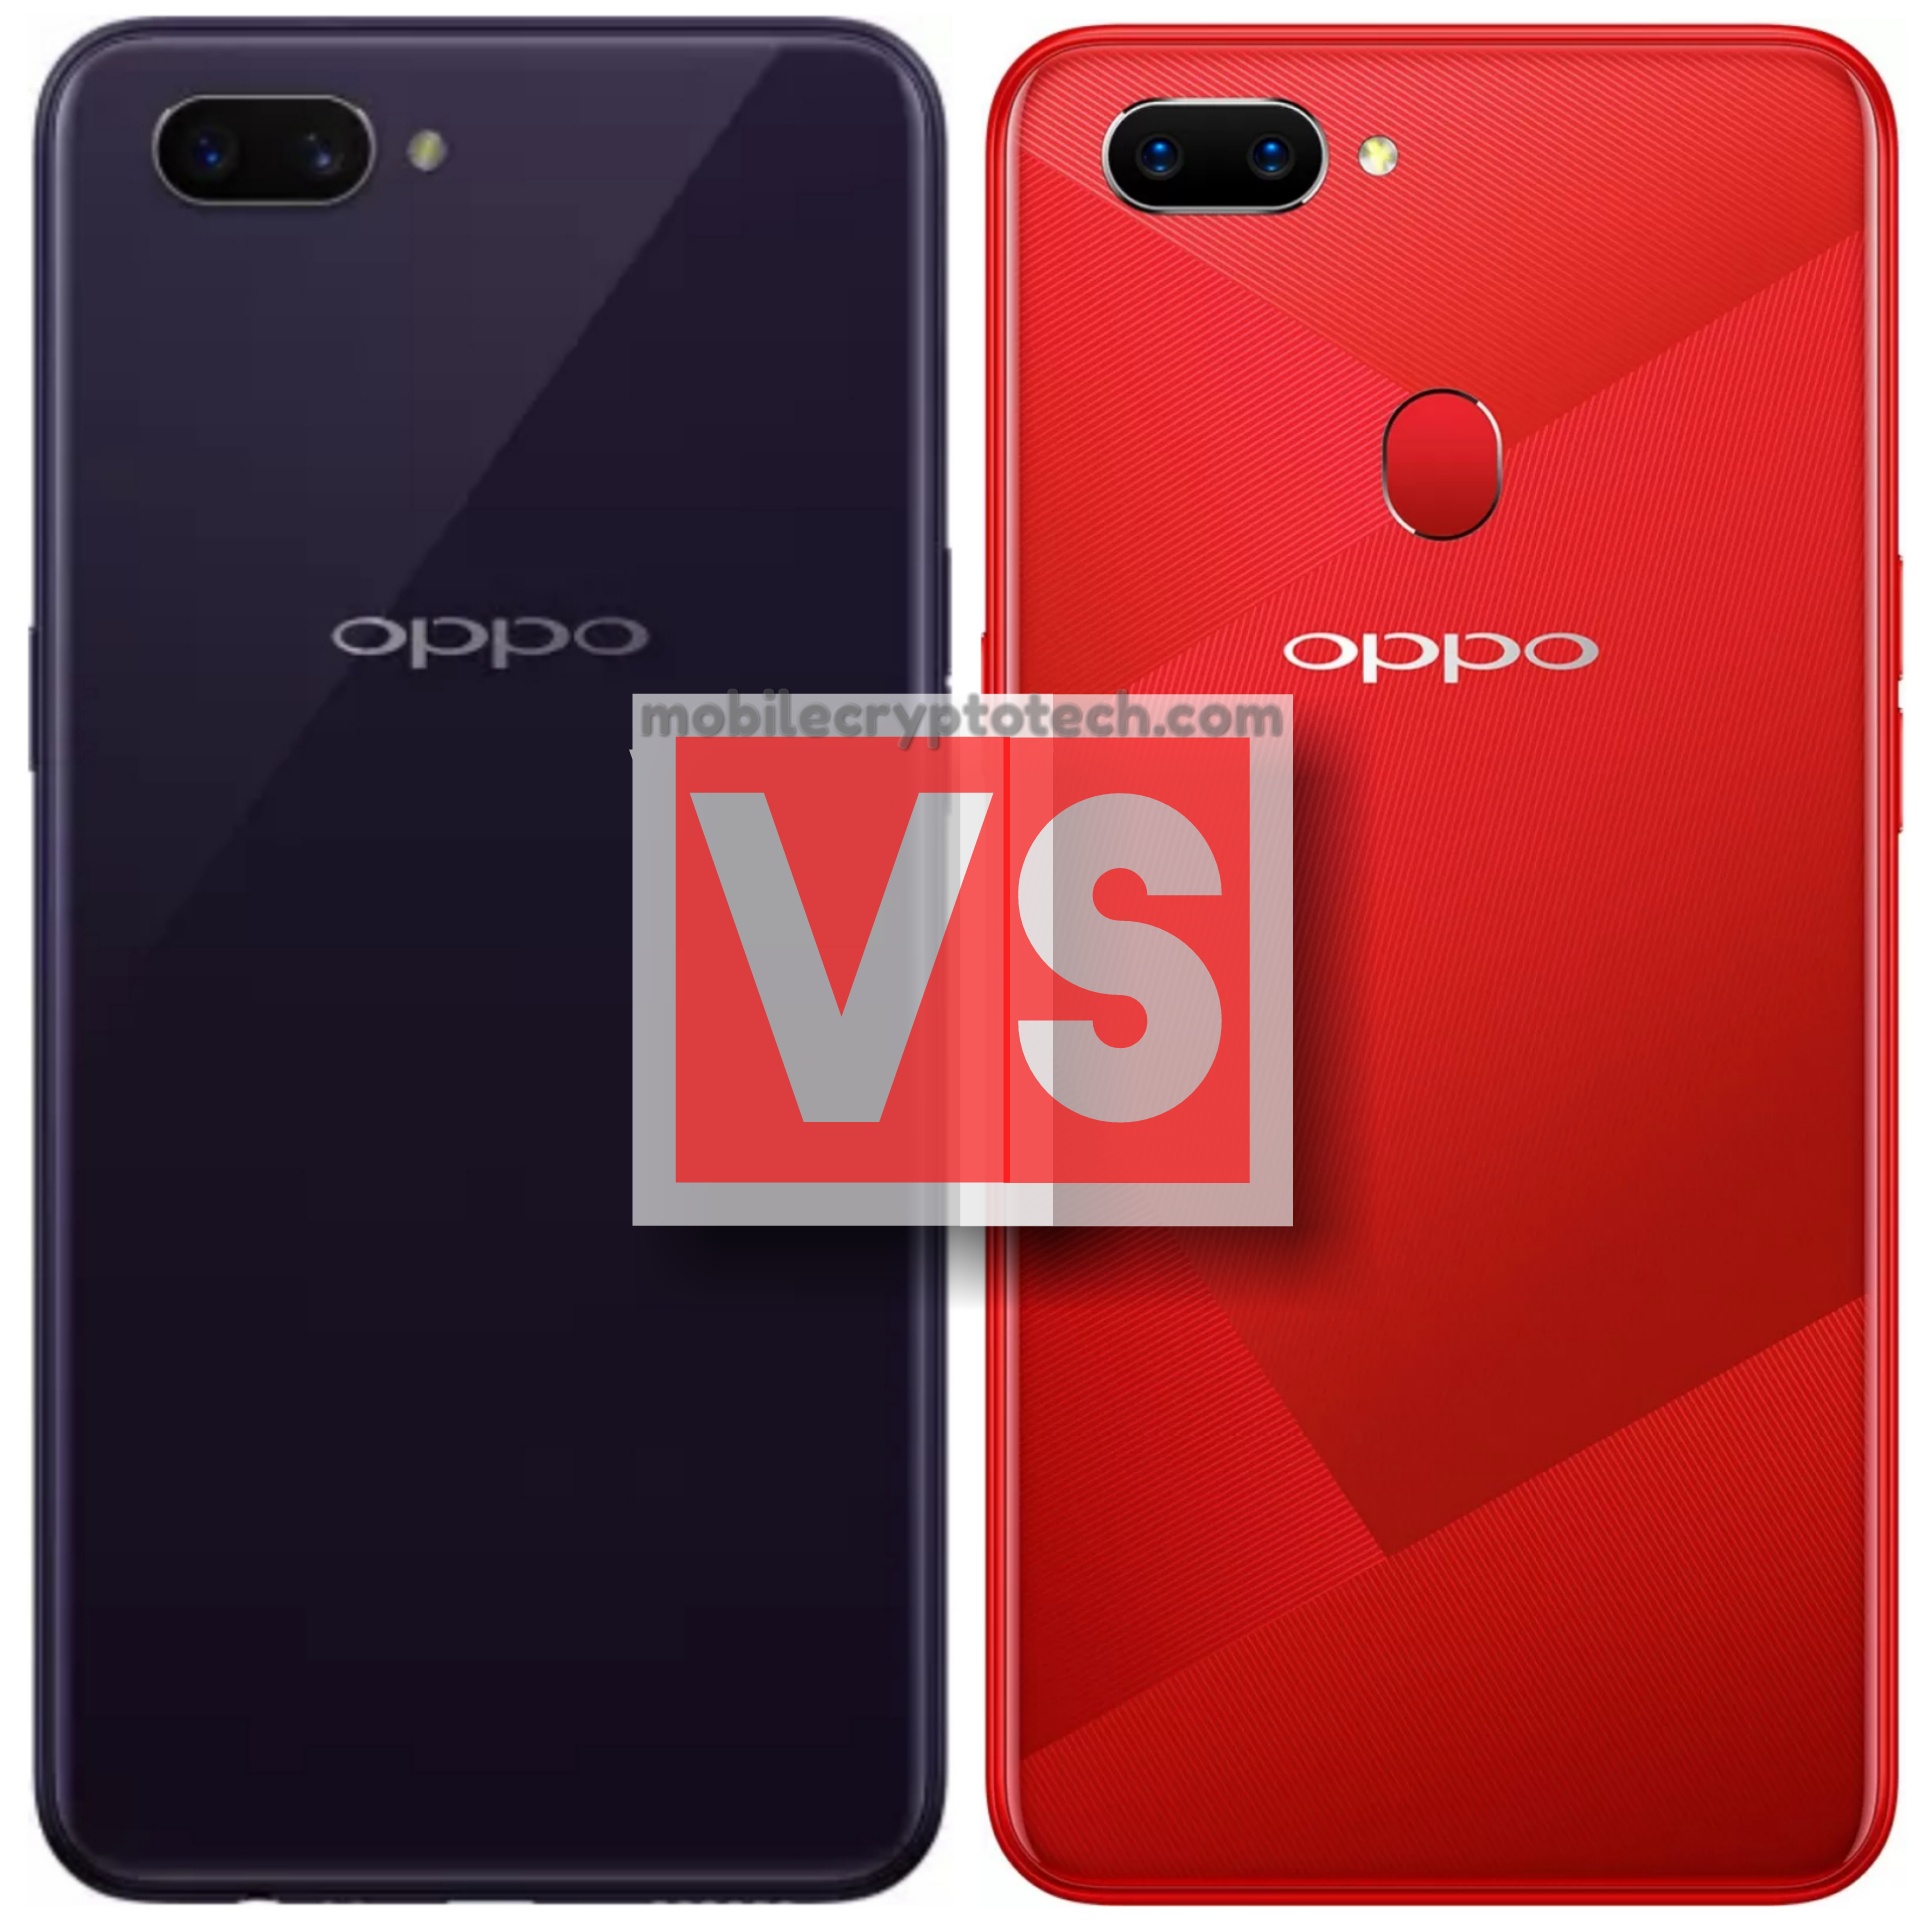 Oppo A3s Vs Oppo A5 Snapdragon 450 And The Same Screen